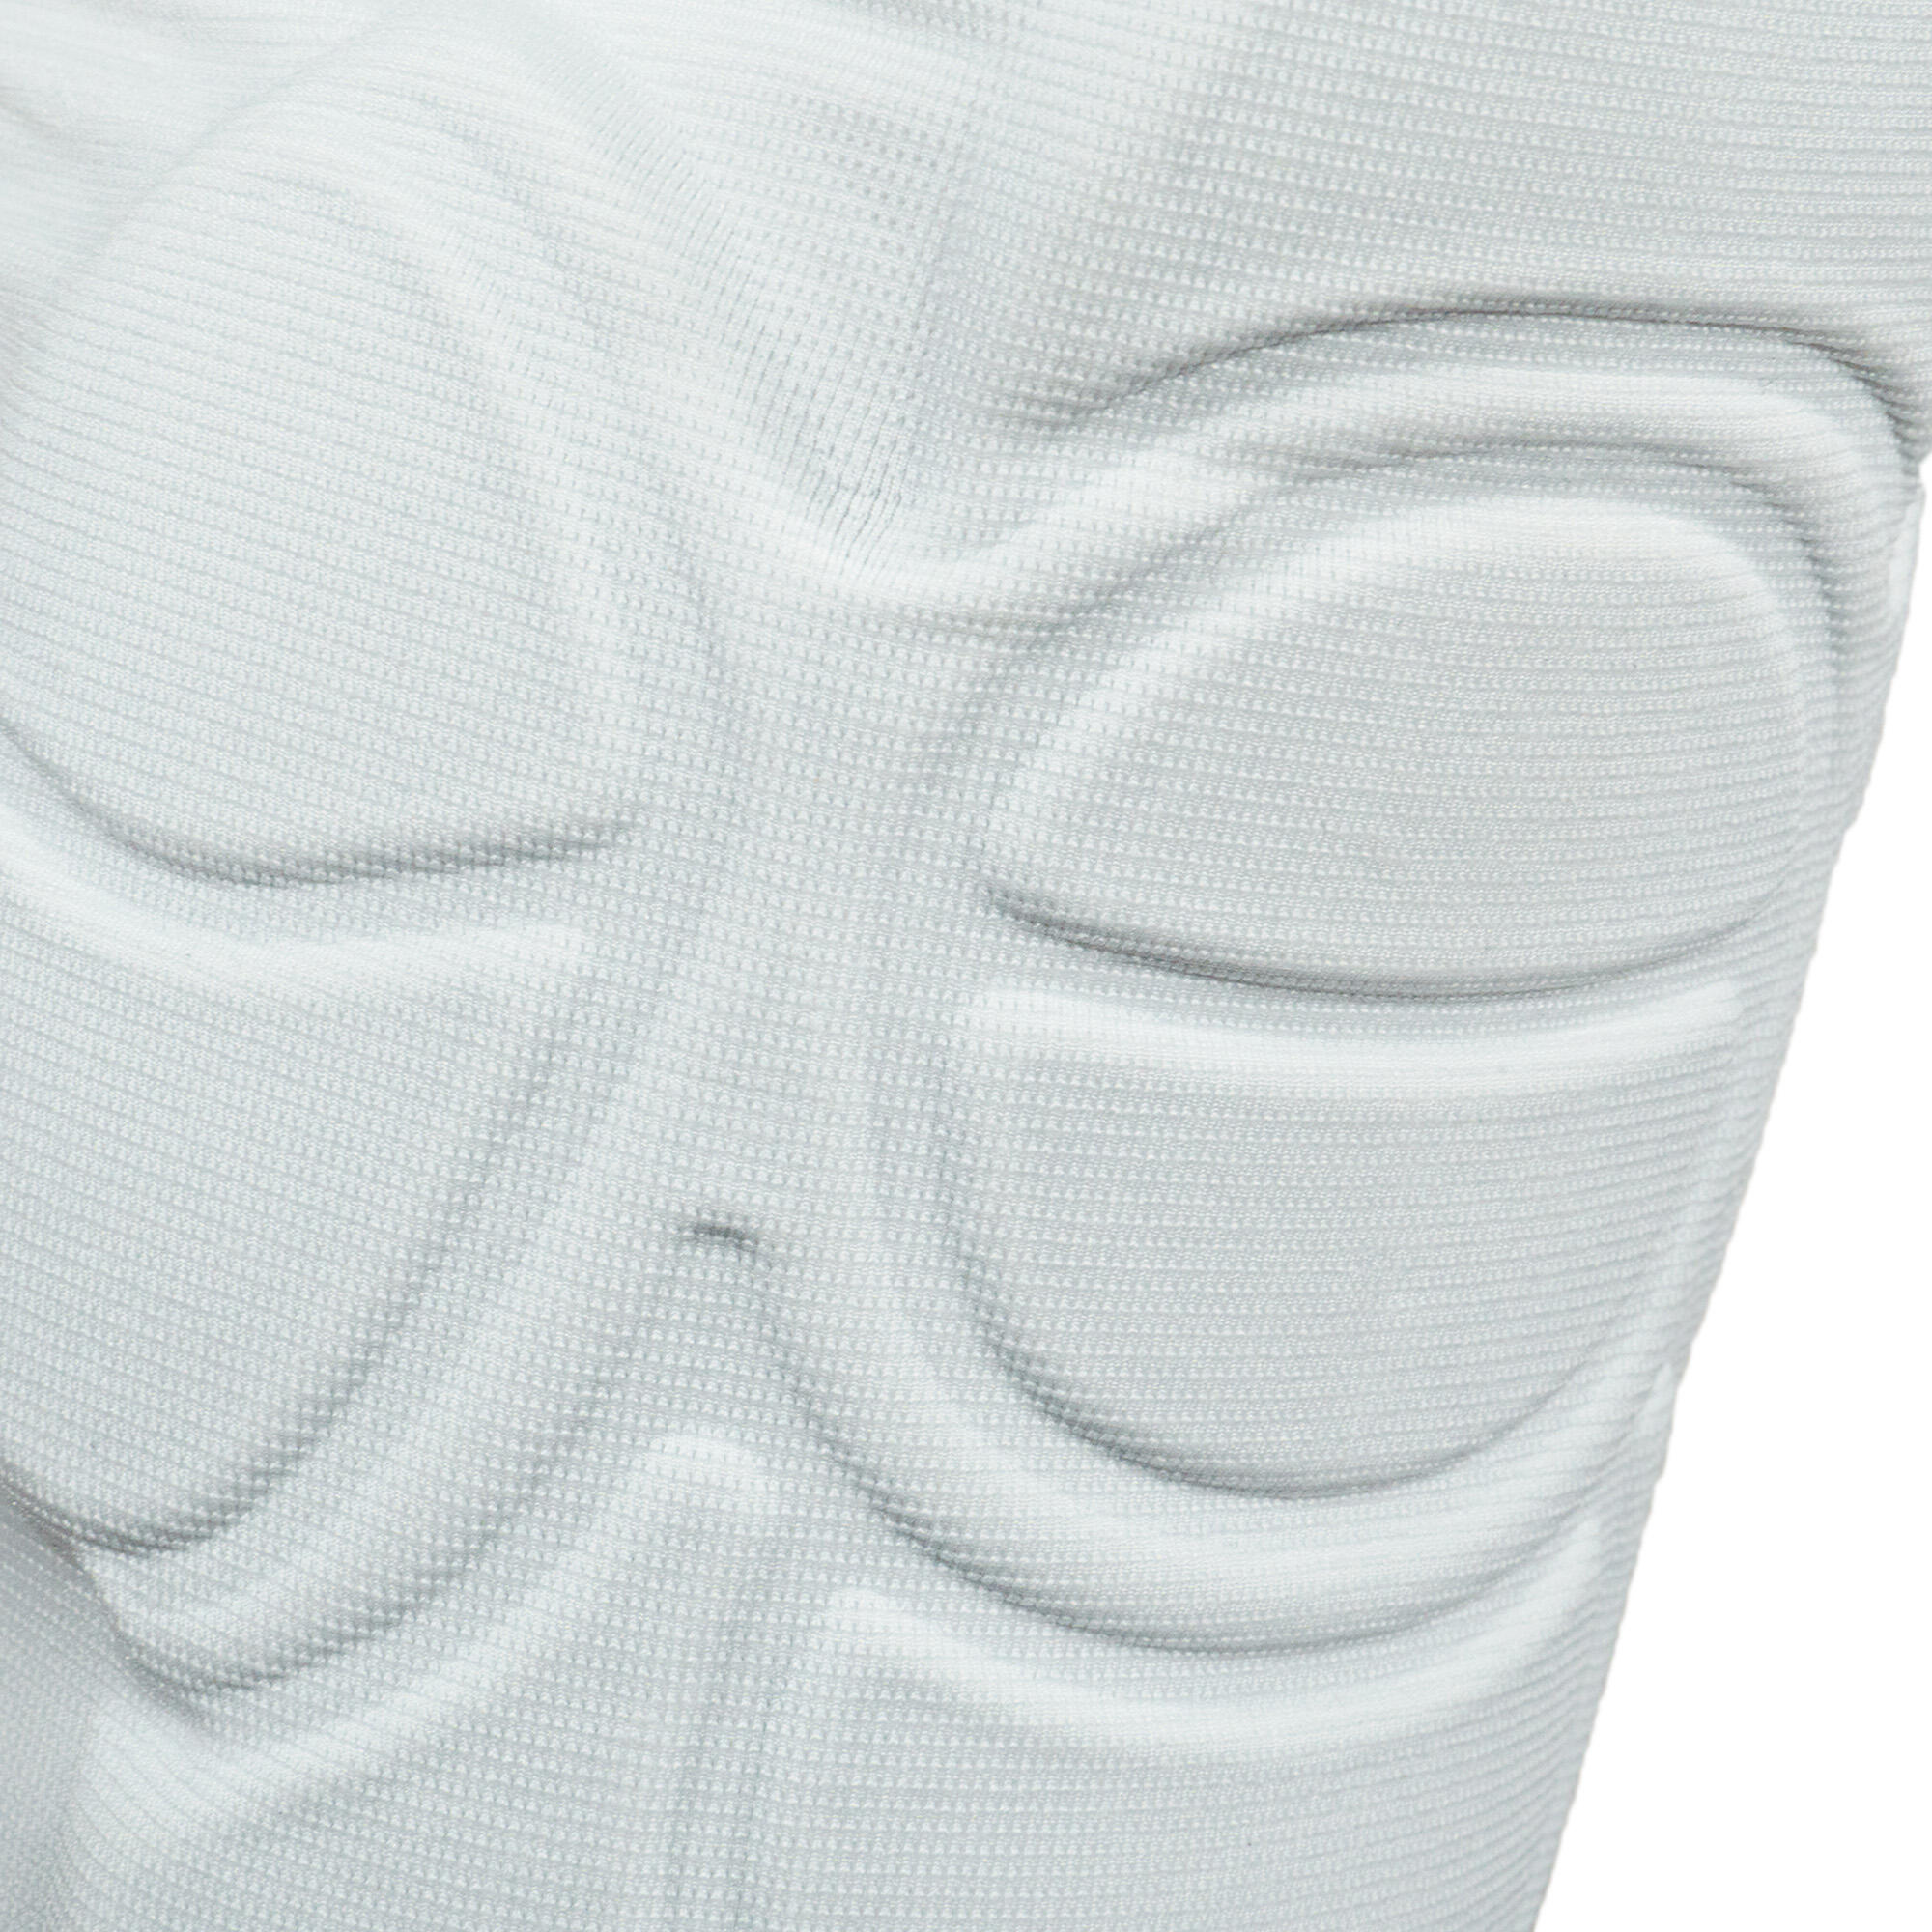 Volleyball Knee Pads for Intensive Play - White 3/3